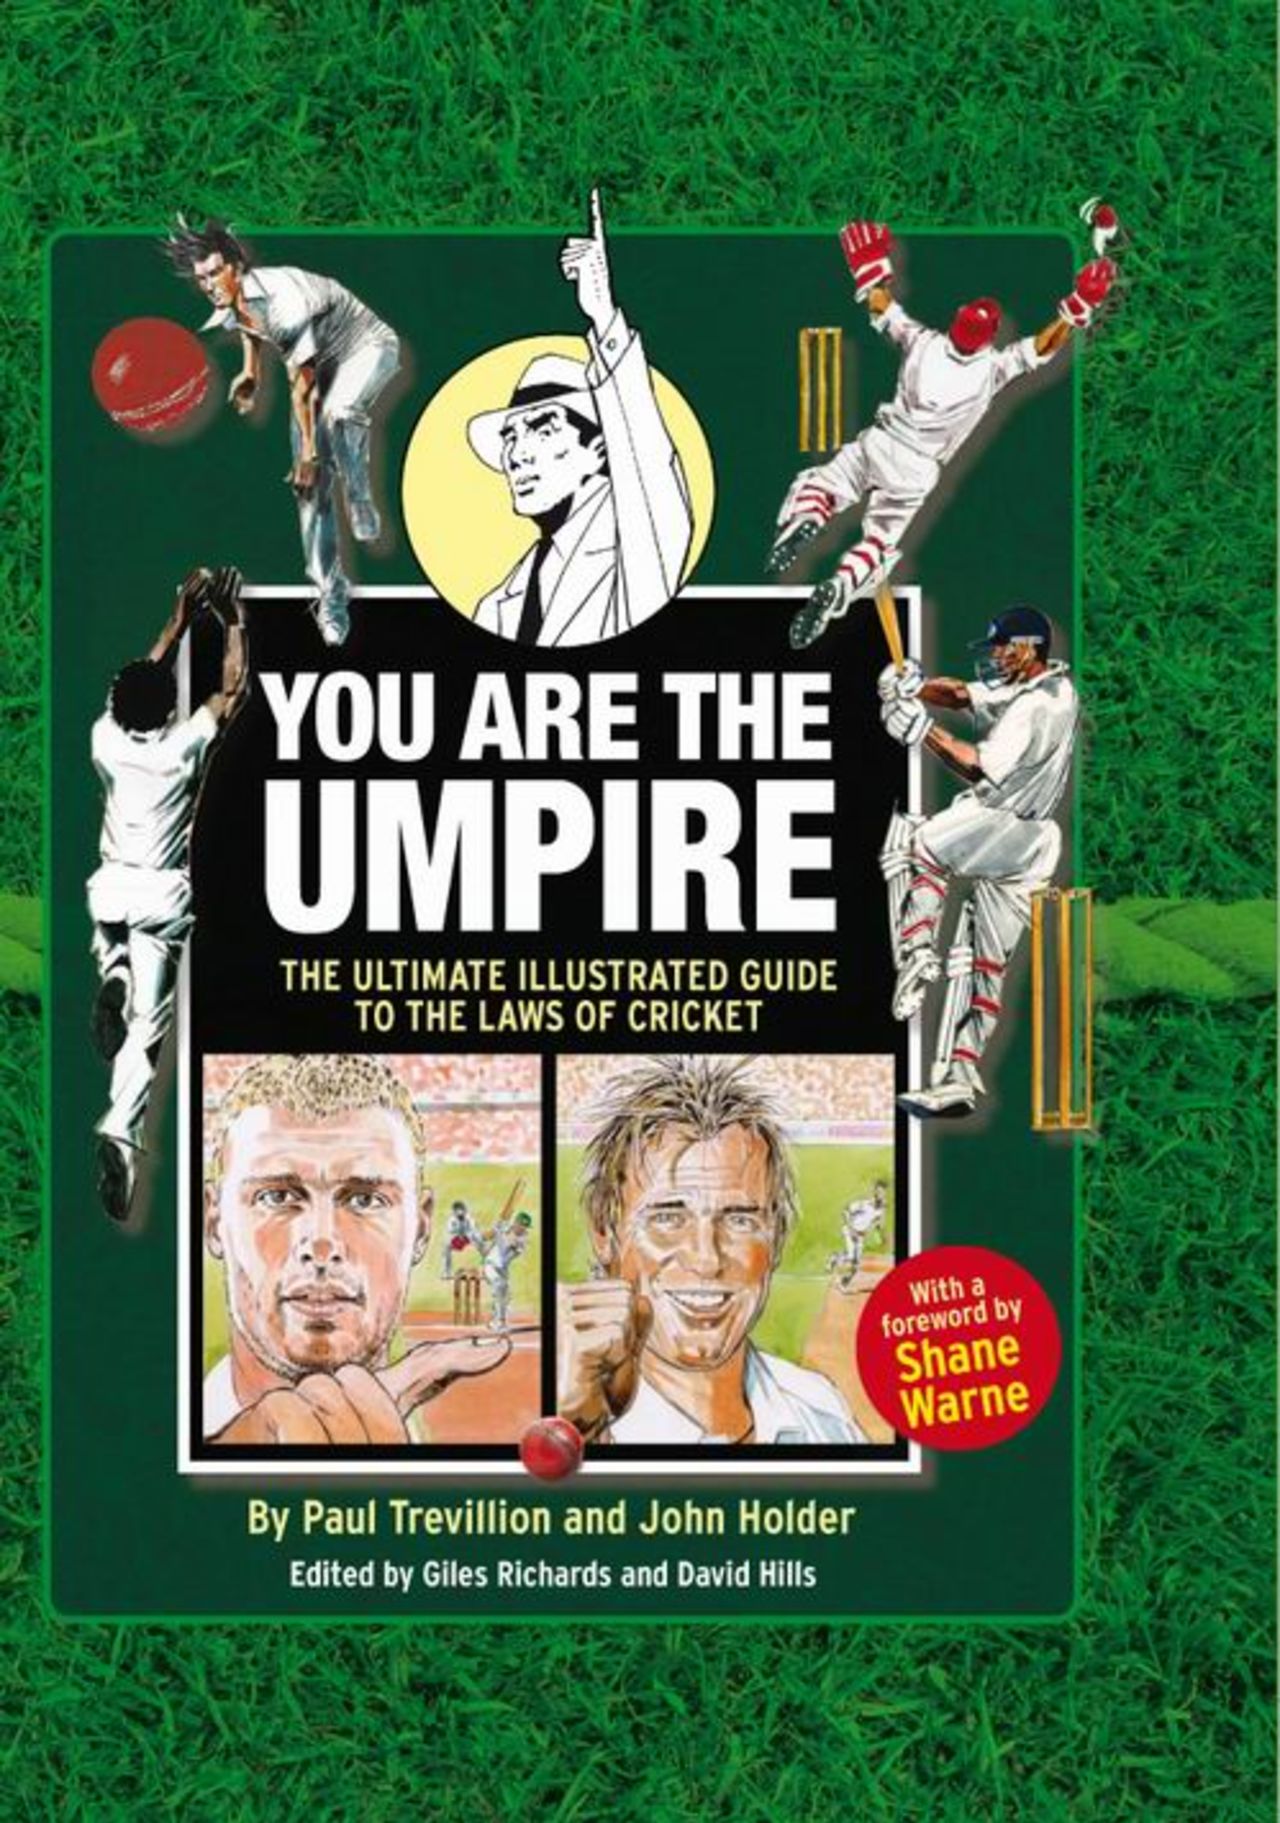 Cover image of <i>You Are The Umpire</i>  by Paul Trevillion and John Holder